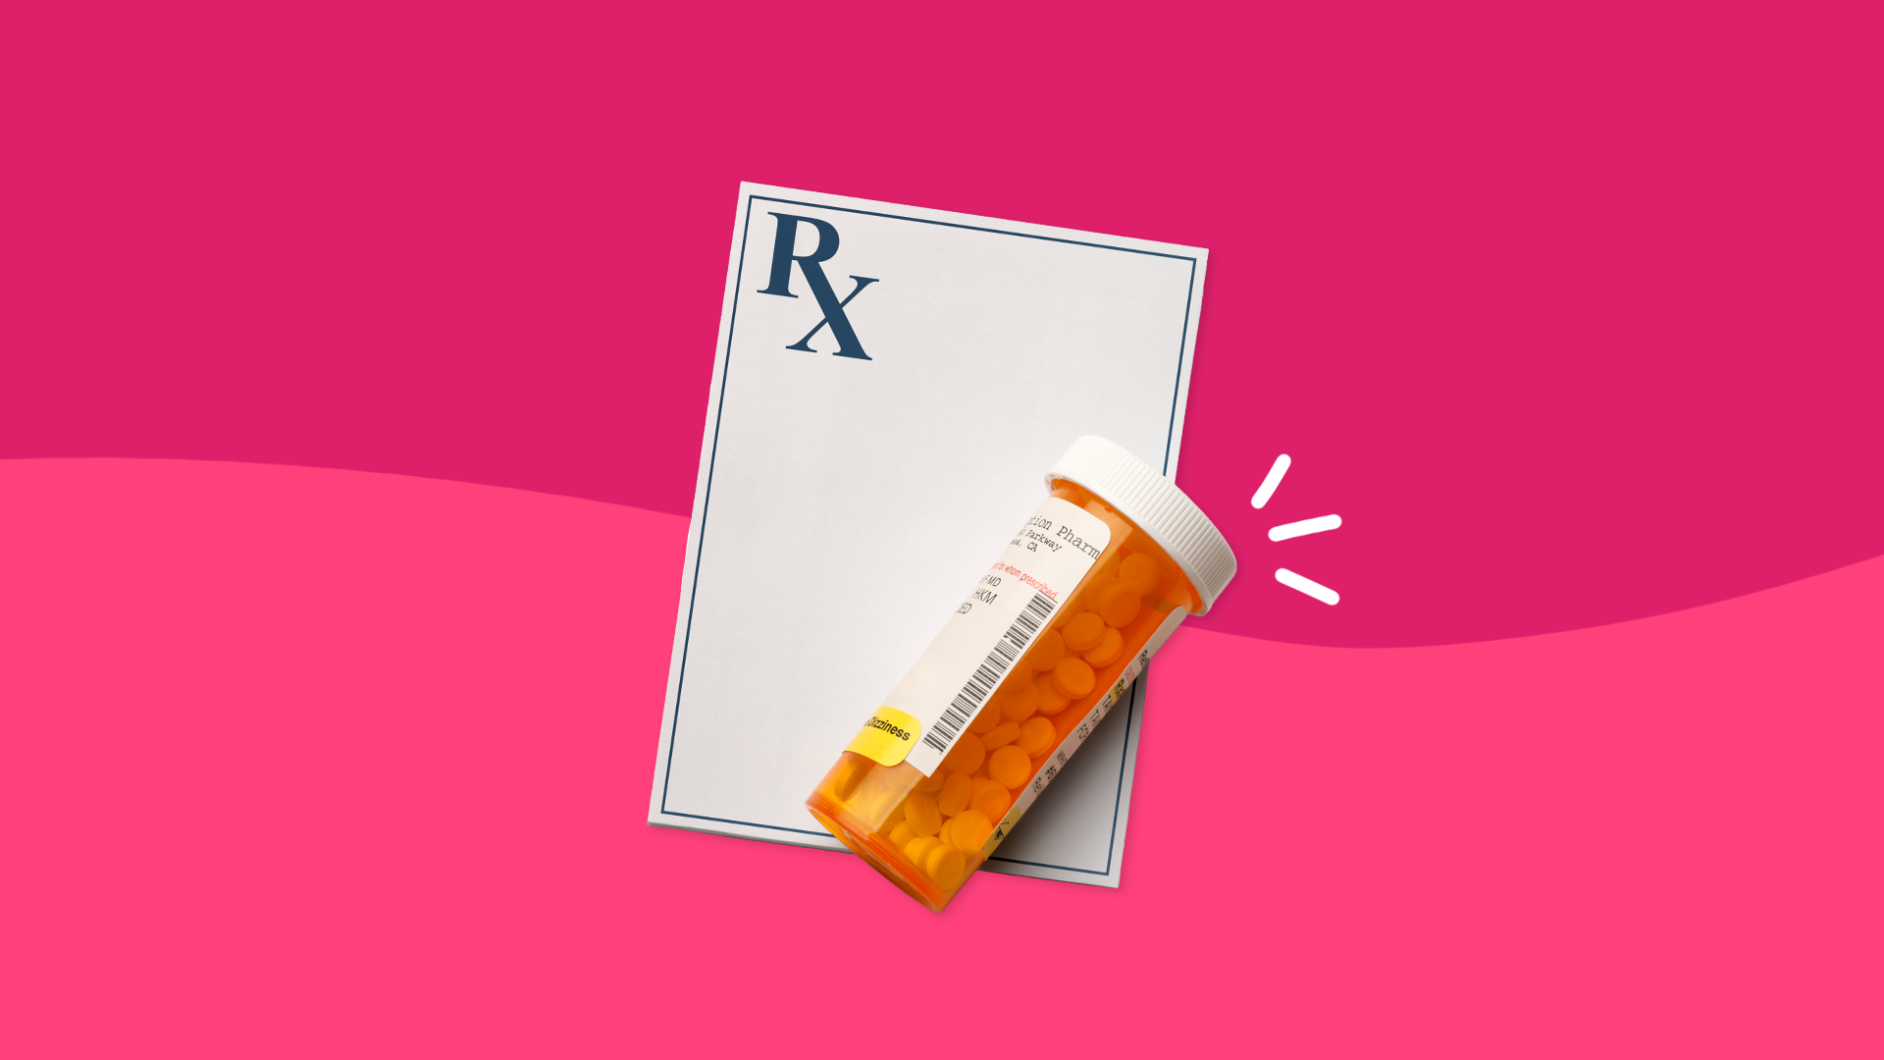 Prescription pad and bottle: Lipitor side effects, warnings, and drug interactions